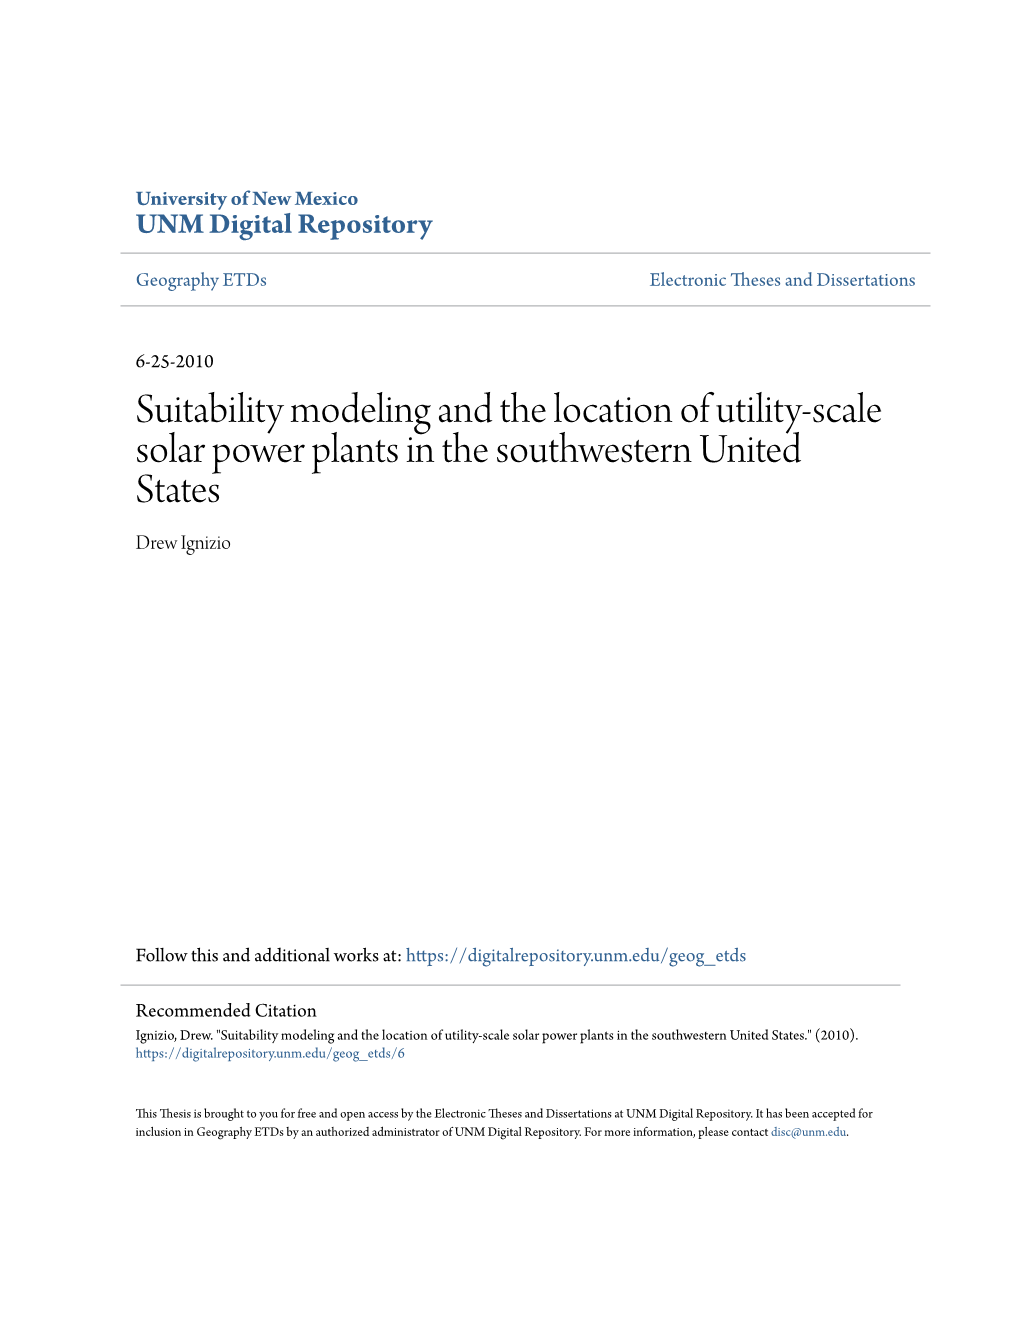 Suitability Modeling and the Location of Utility-Scale Solar Power Plants in the Southwestern United States Drew Ignizio